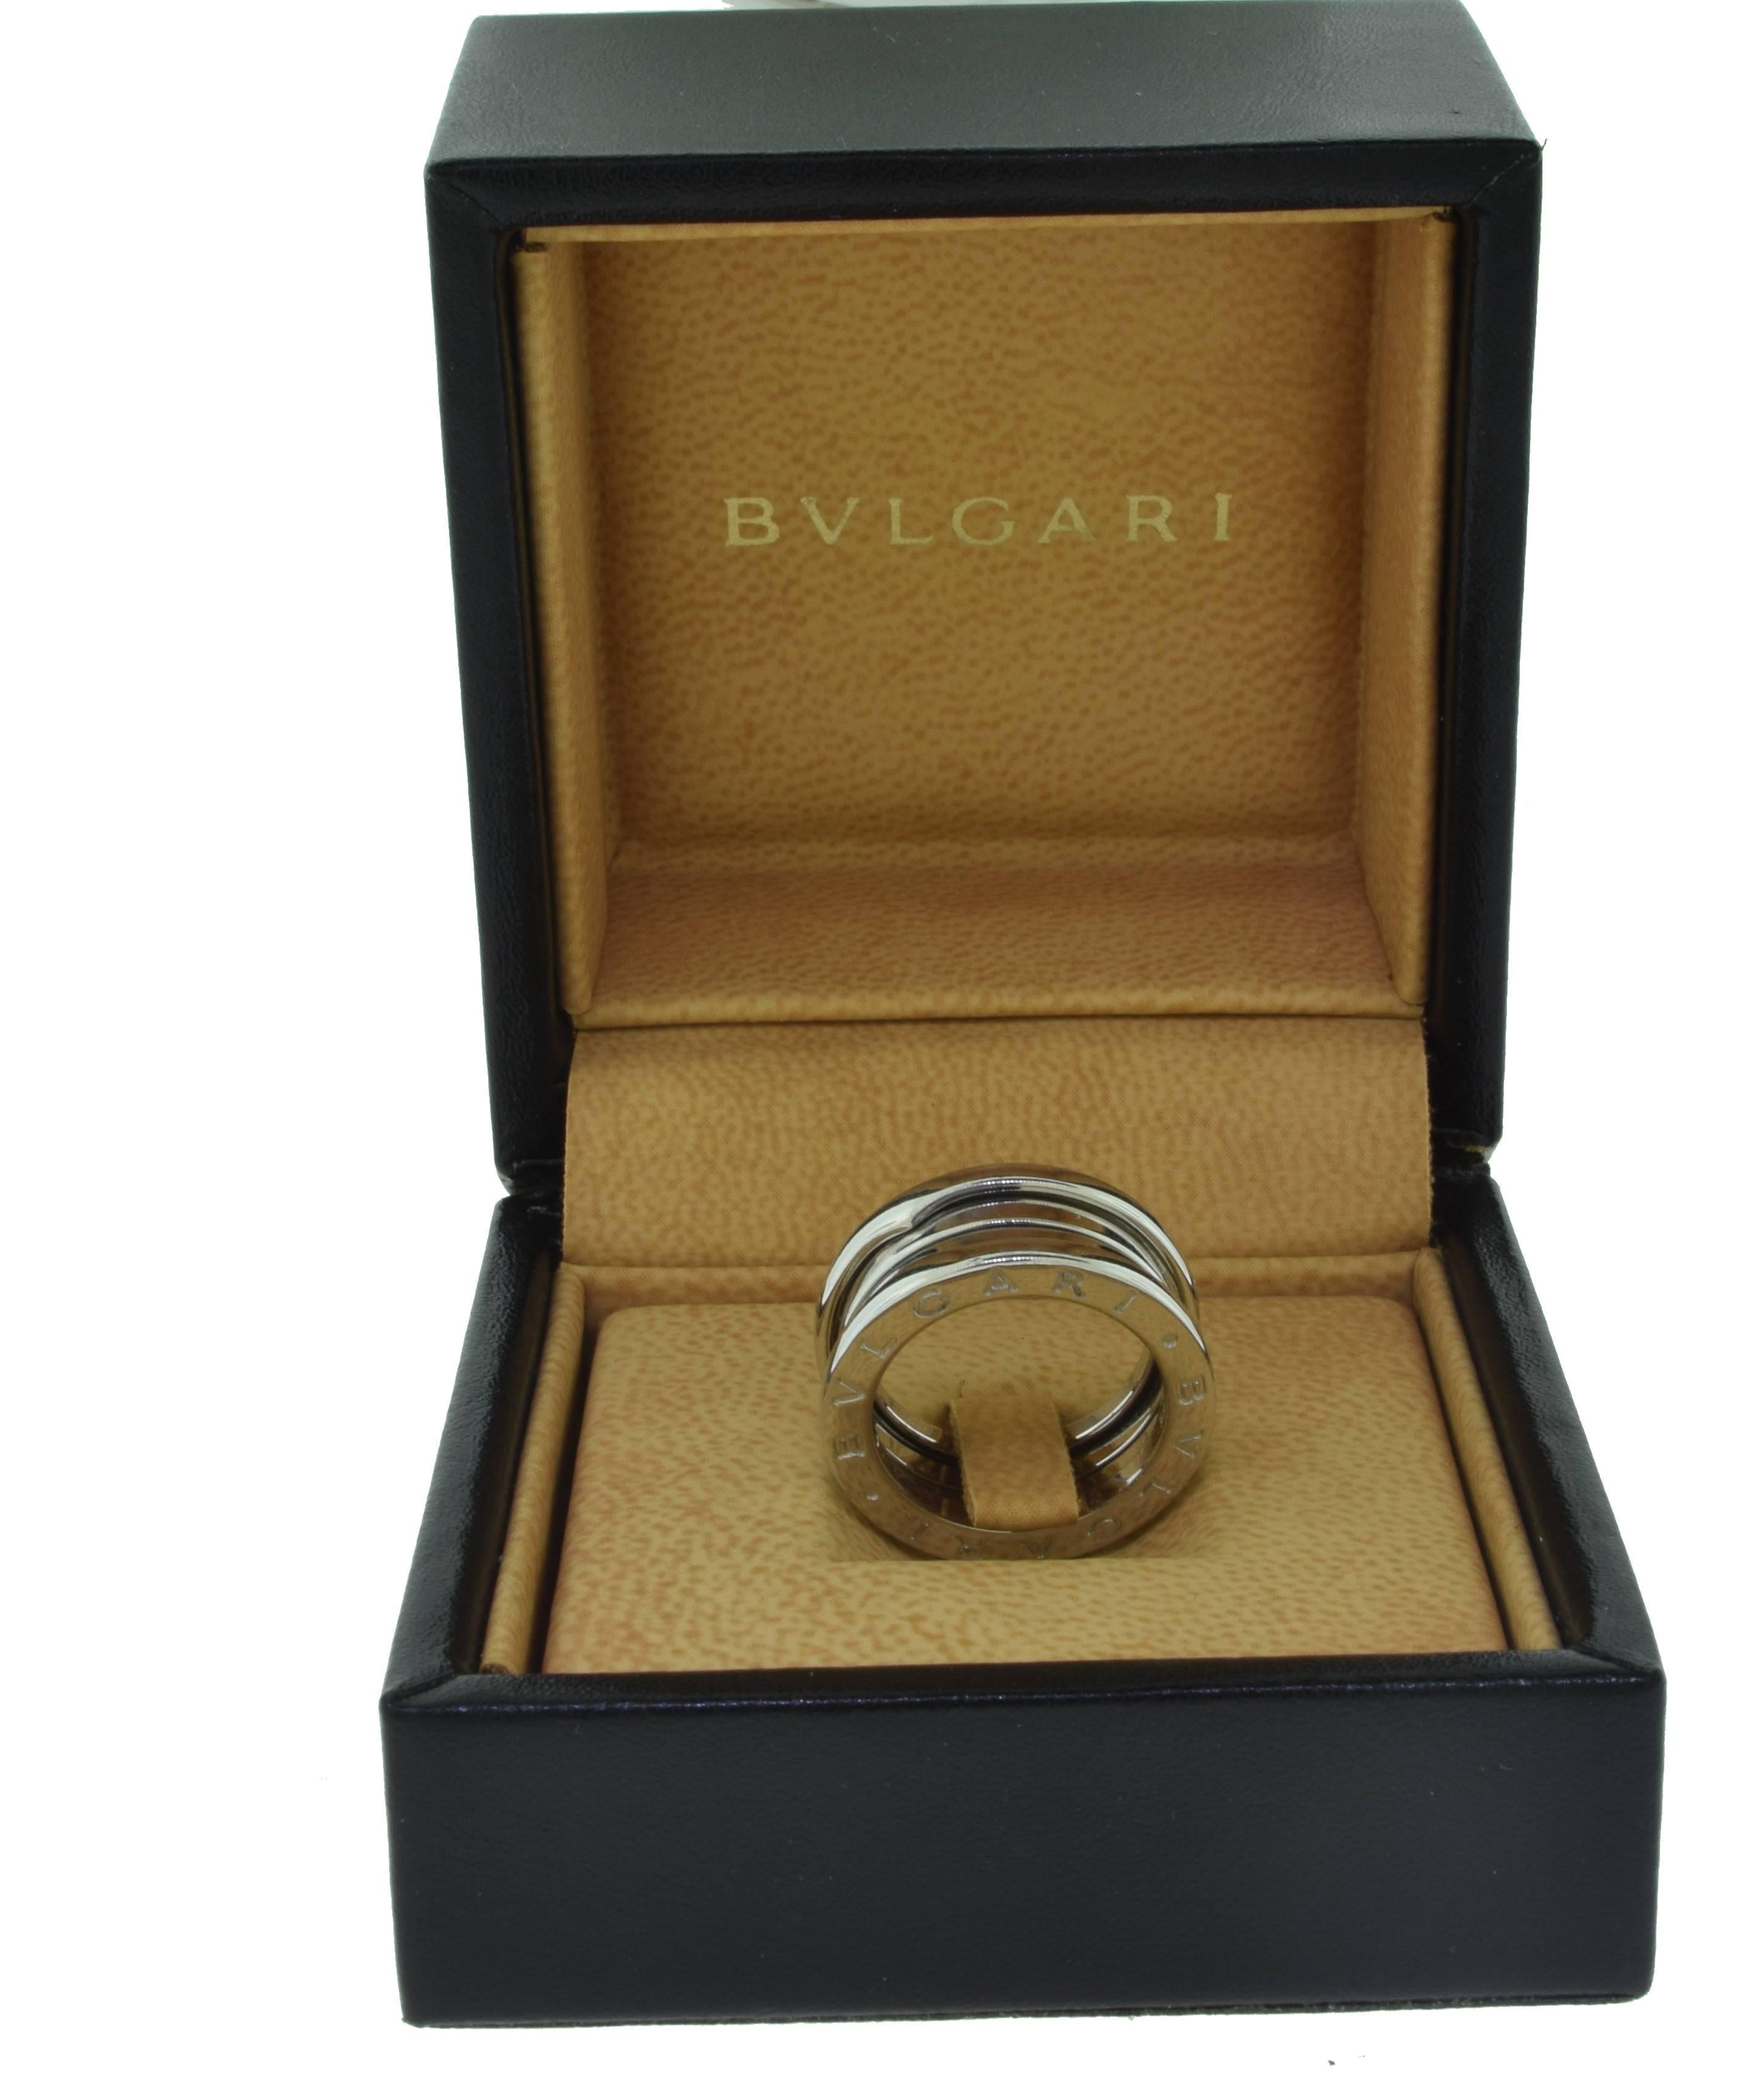 From BVLGARI's gorgeous B.zero1 Collection:

Ring Size: 48 (euro) ; 4.25 - 4.5 (US)
Type: 2 Band Ring

Metal: 18k White Gold
Total Item Weight (g): 8.8
Hallmark: Made In Italy 48 BVLGARI 750
Collateral: Manufacturer's Box

About the Collection: